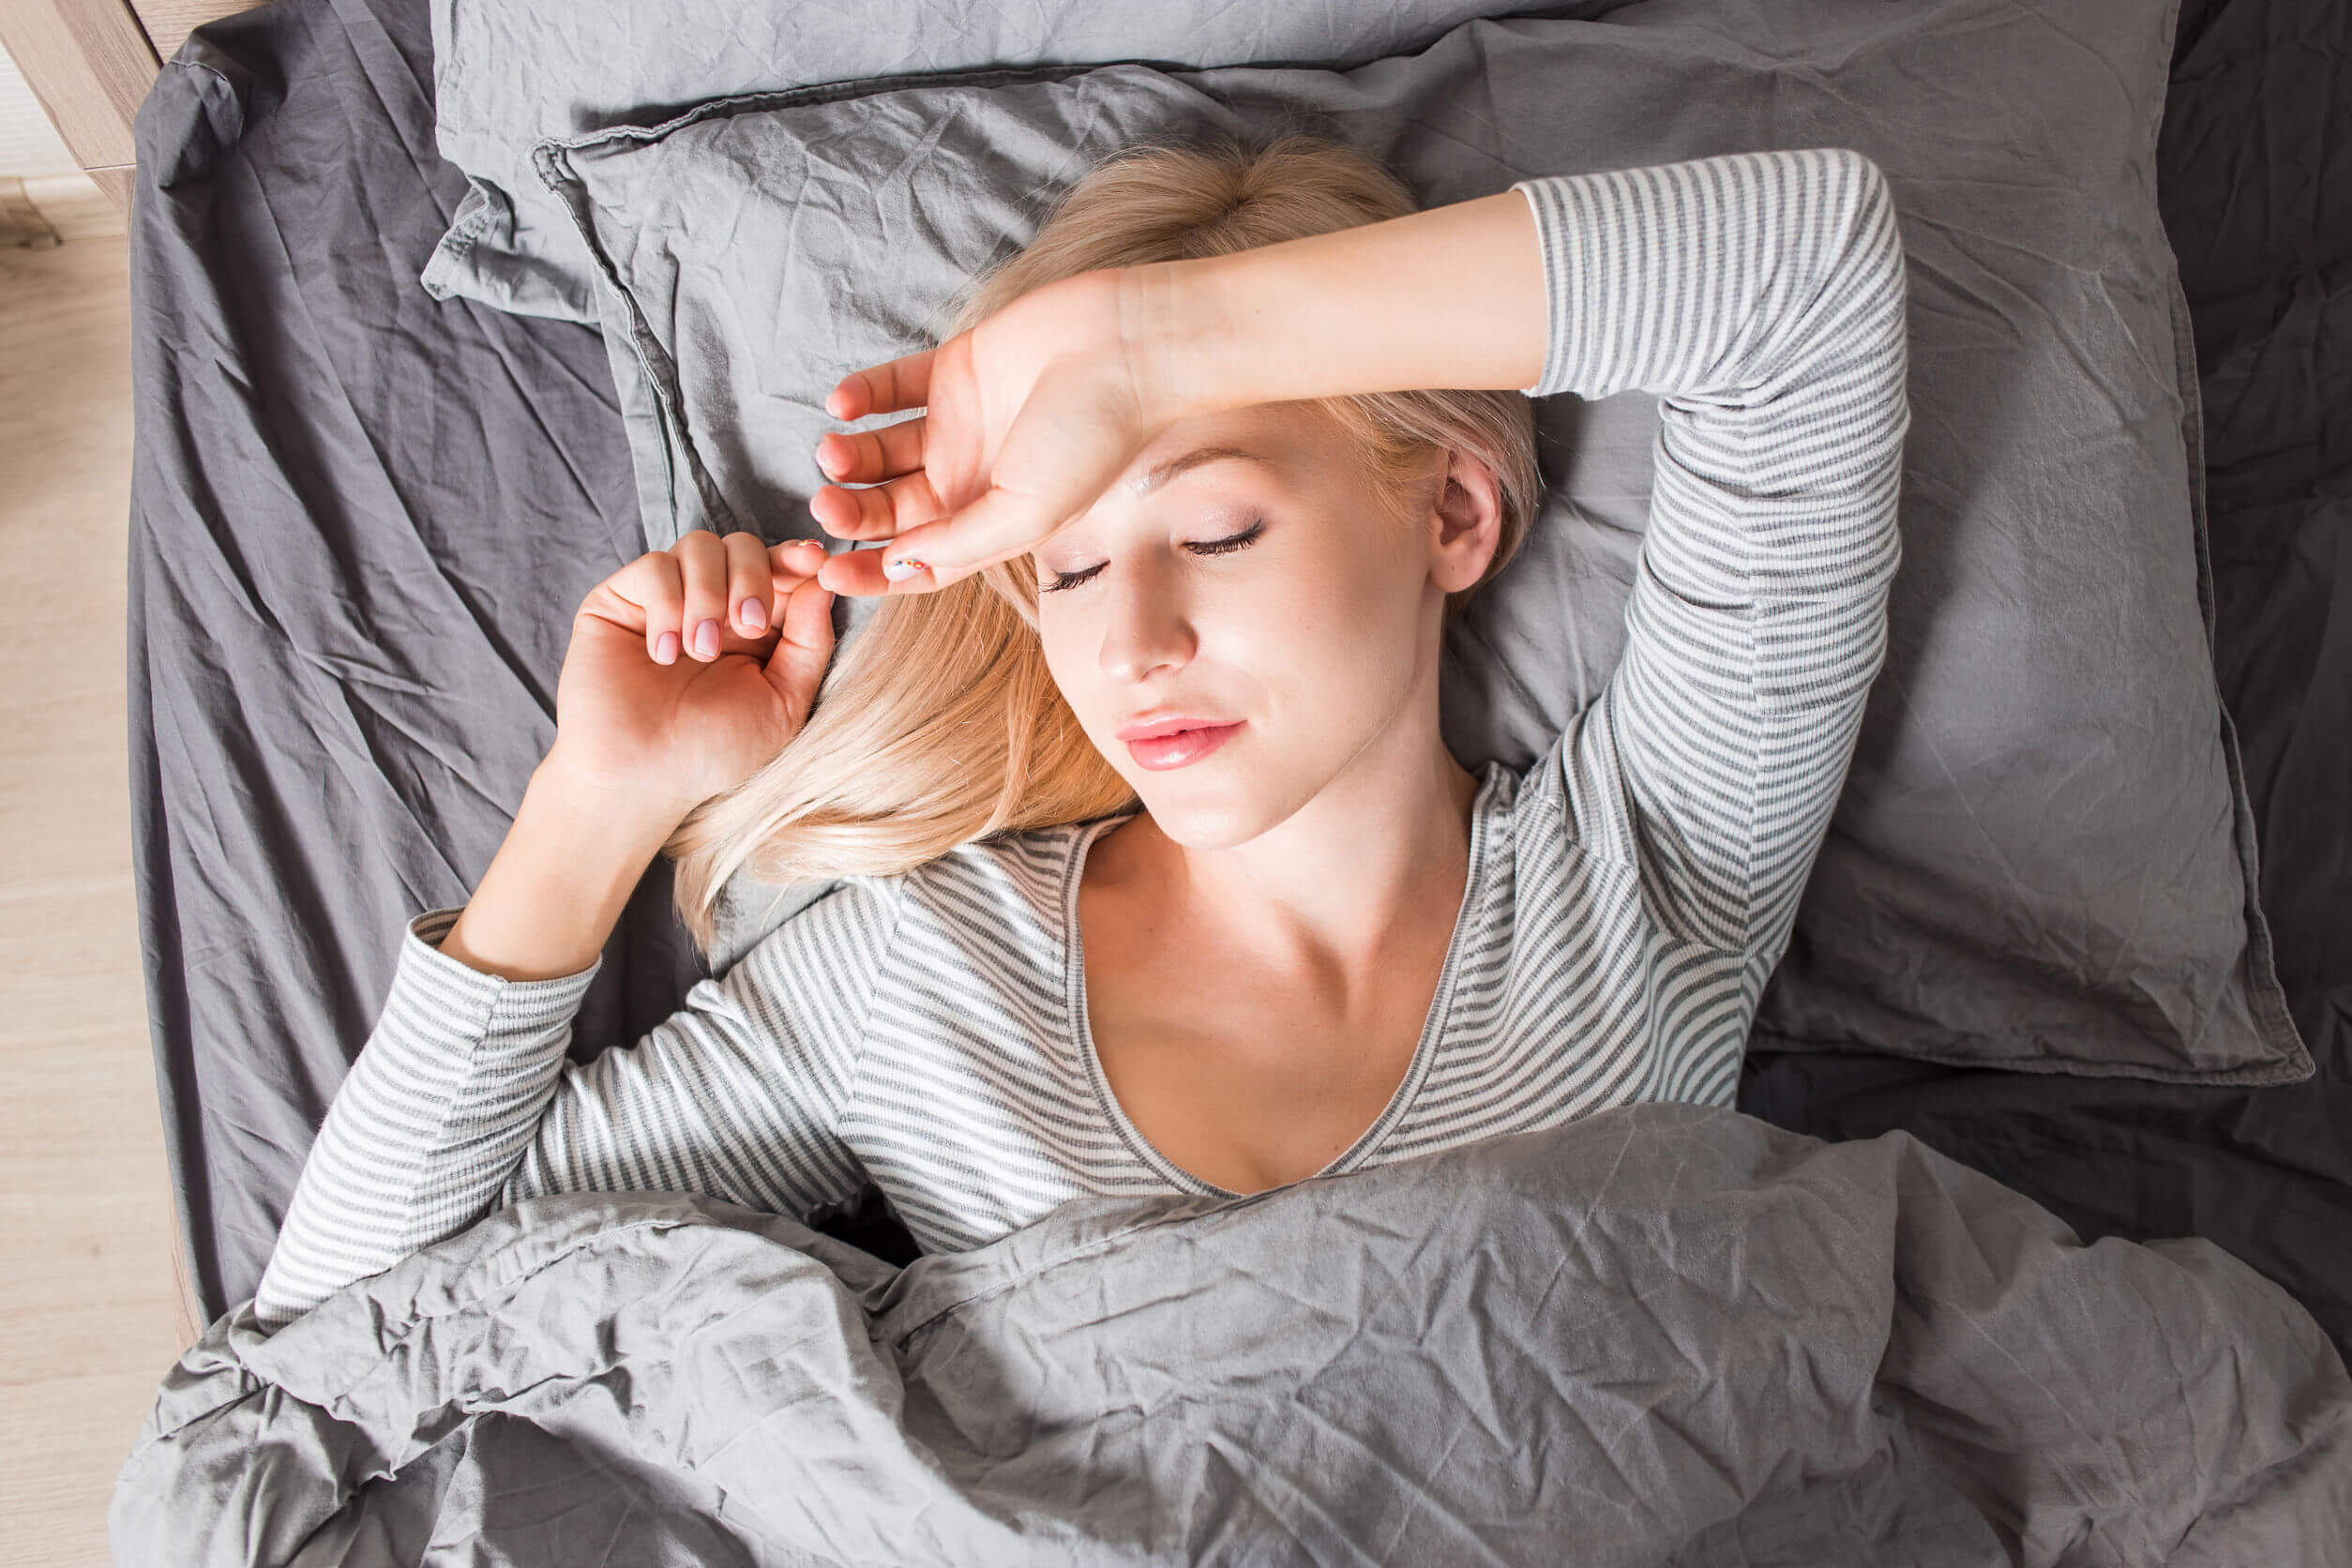 Tips for a good night's sleep help you improve your quality of life.